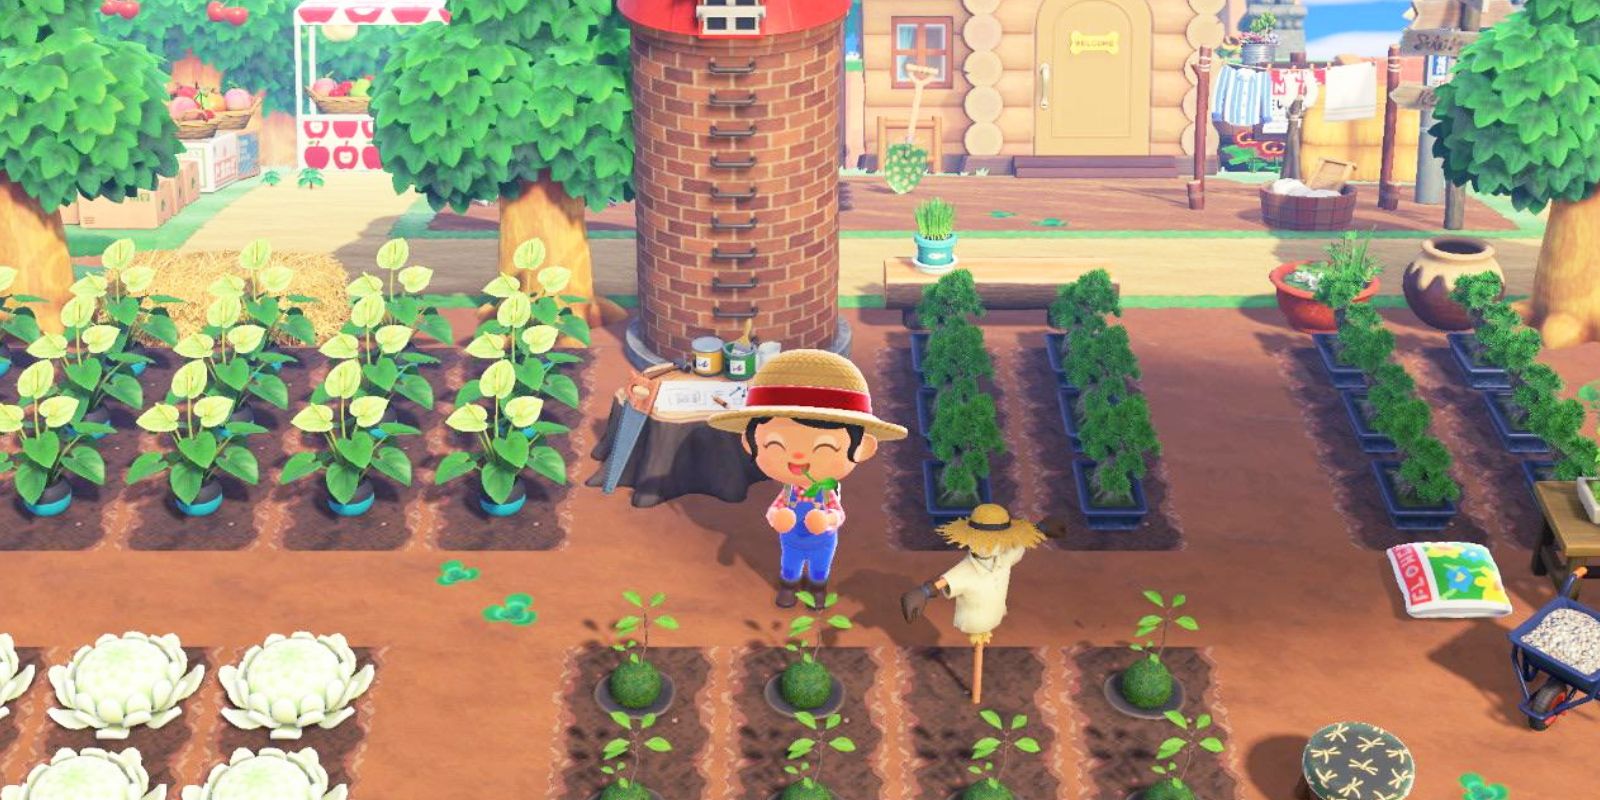 The player is holding a crop in the middle of their farm in Animal Crossing New Horizons.